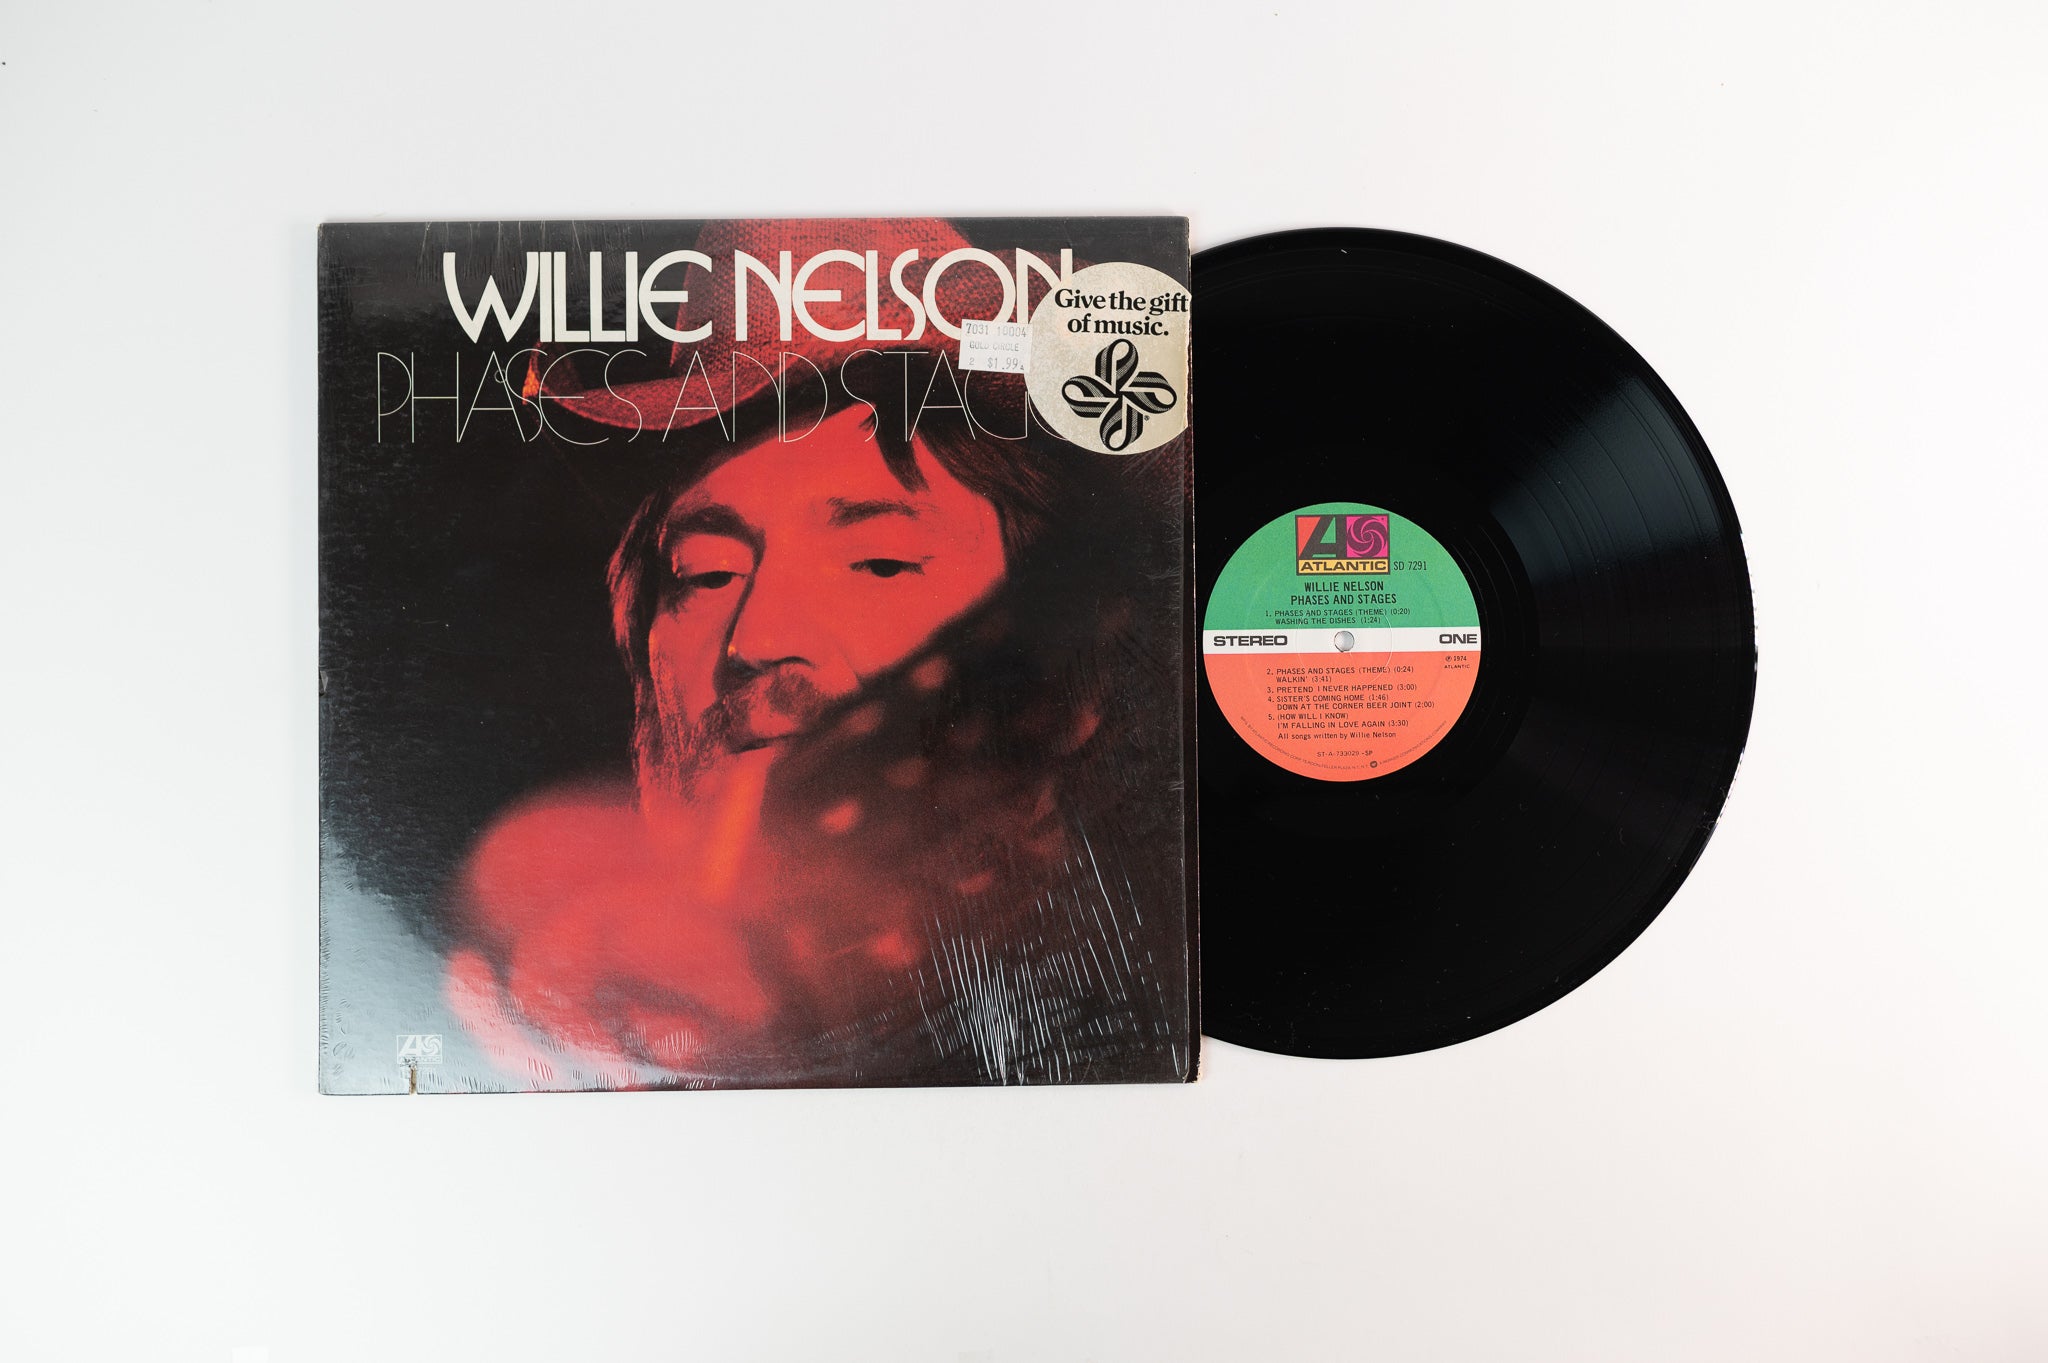 Willie Nelson - Phases And Stages on Atlantic